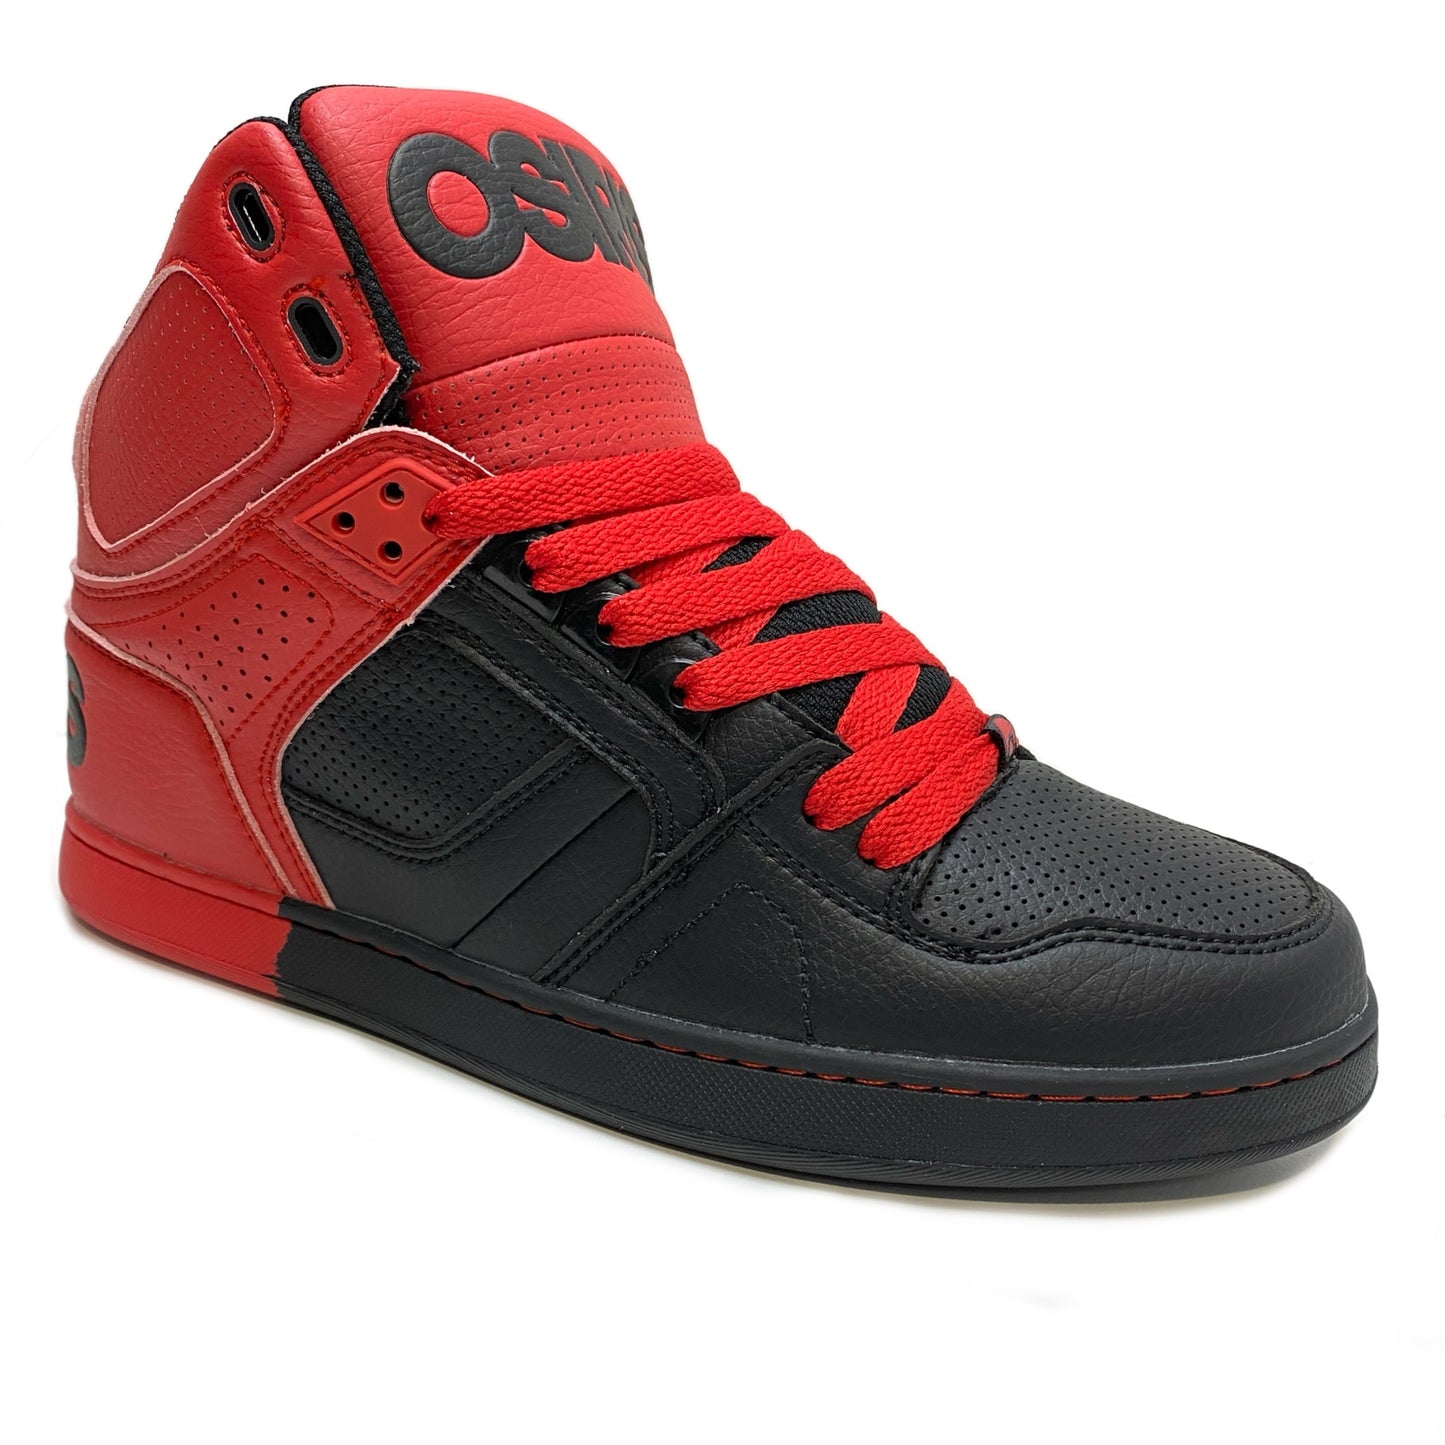 OSIRIS SHOES NYC 83 CLK BLACK RED DIP TRAINERS